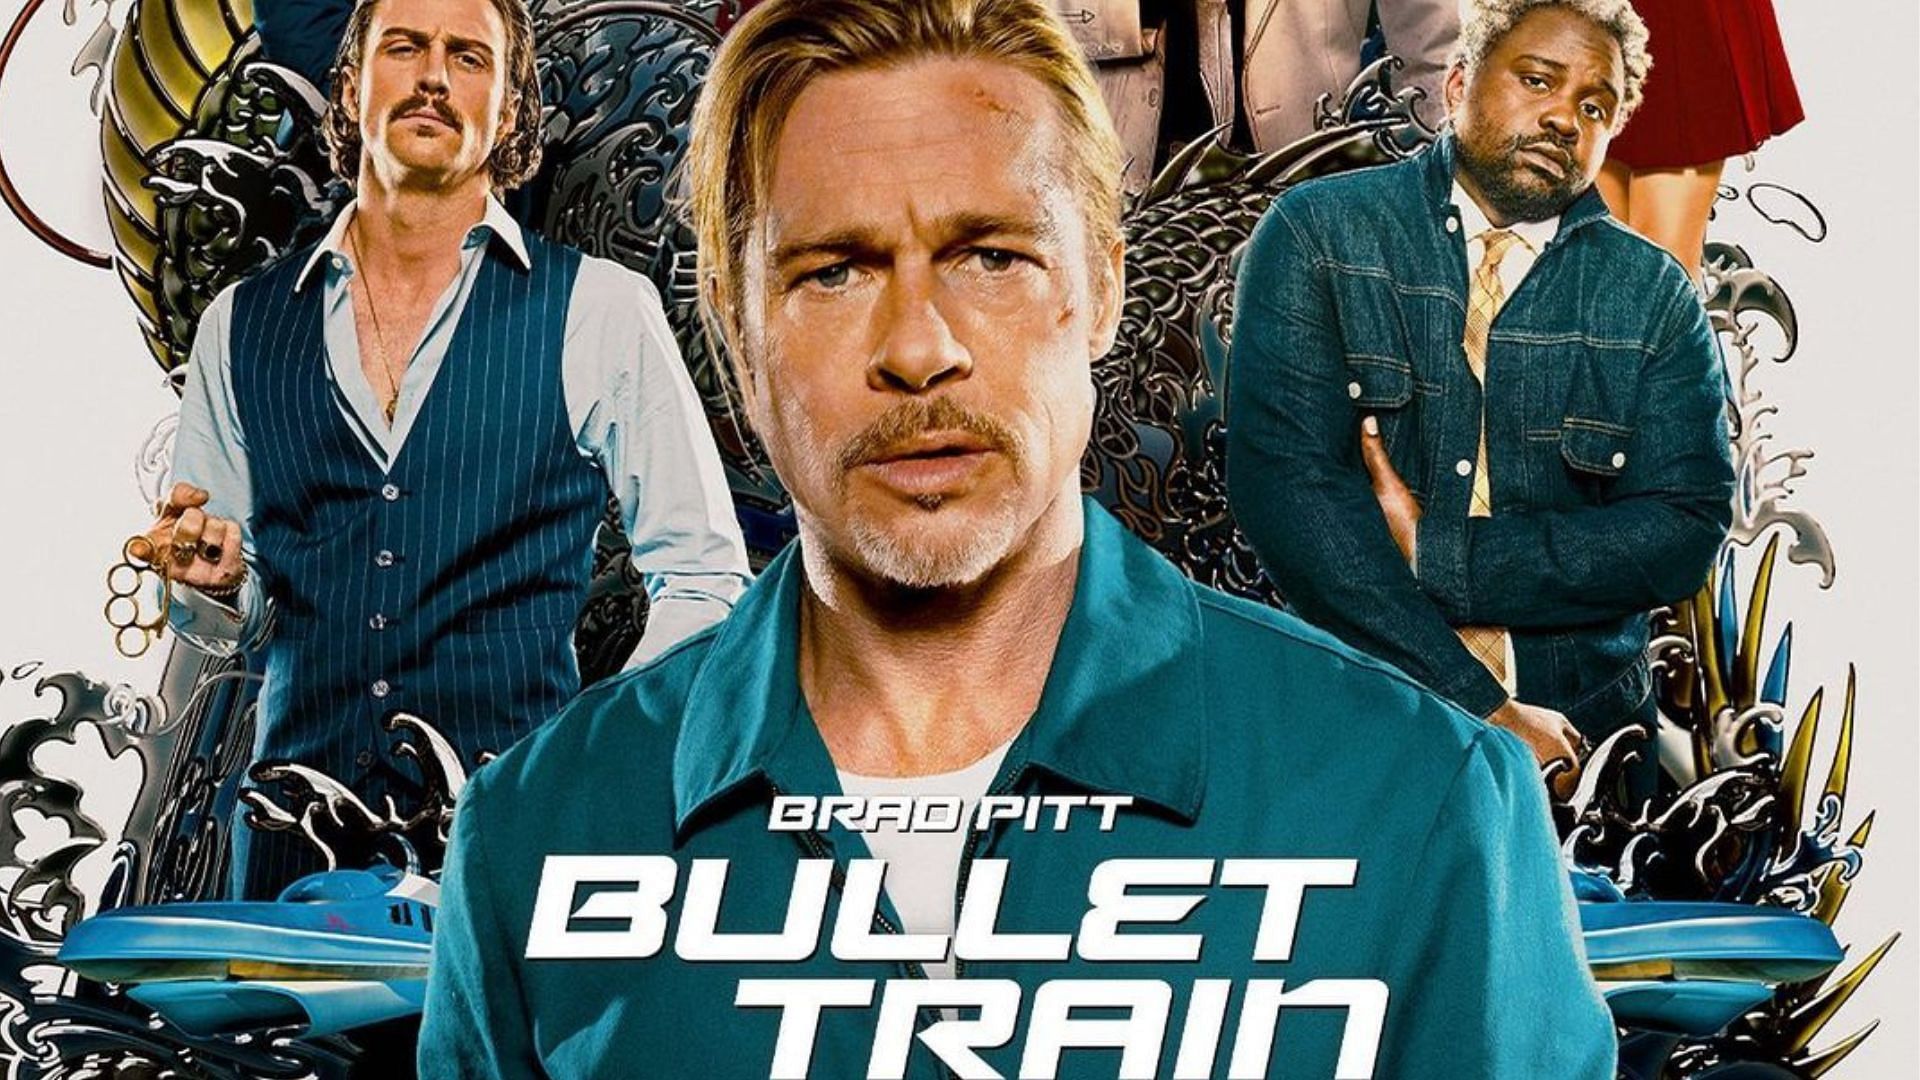 Brad Pitt's Bullet Train movie Release date, cast and everything we